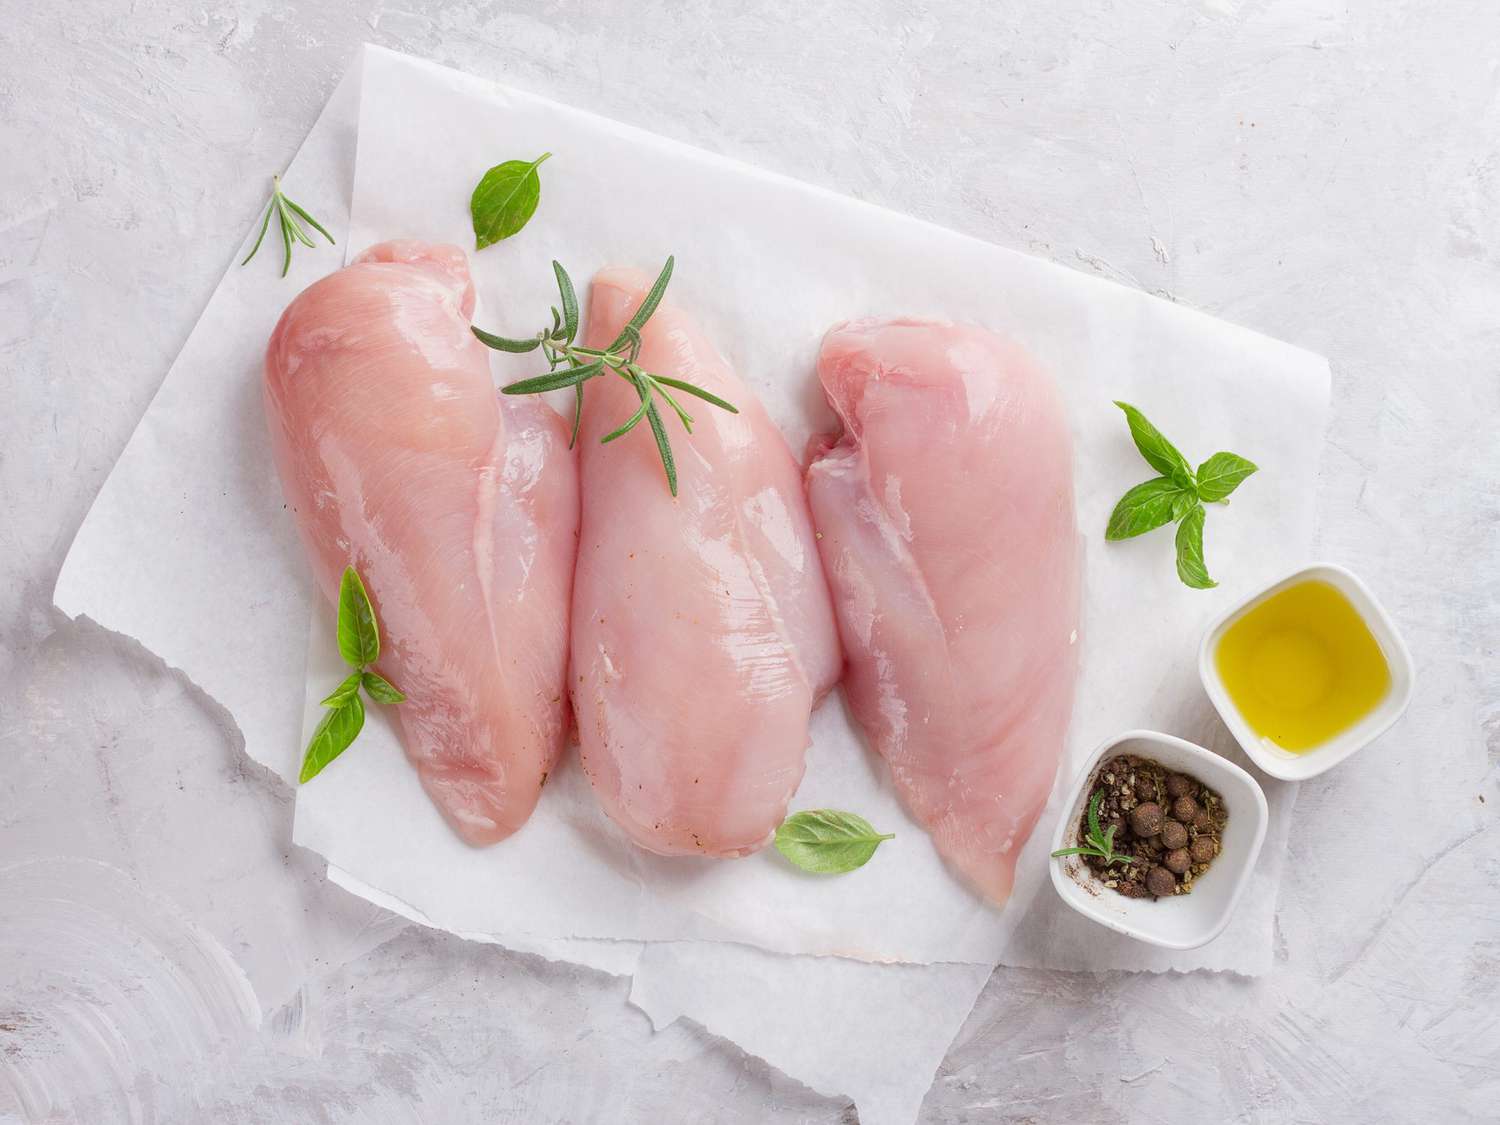 How To Store Chicken Breast